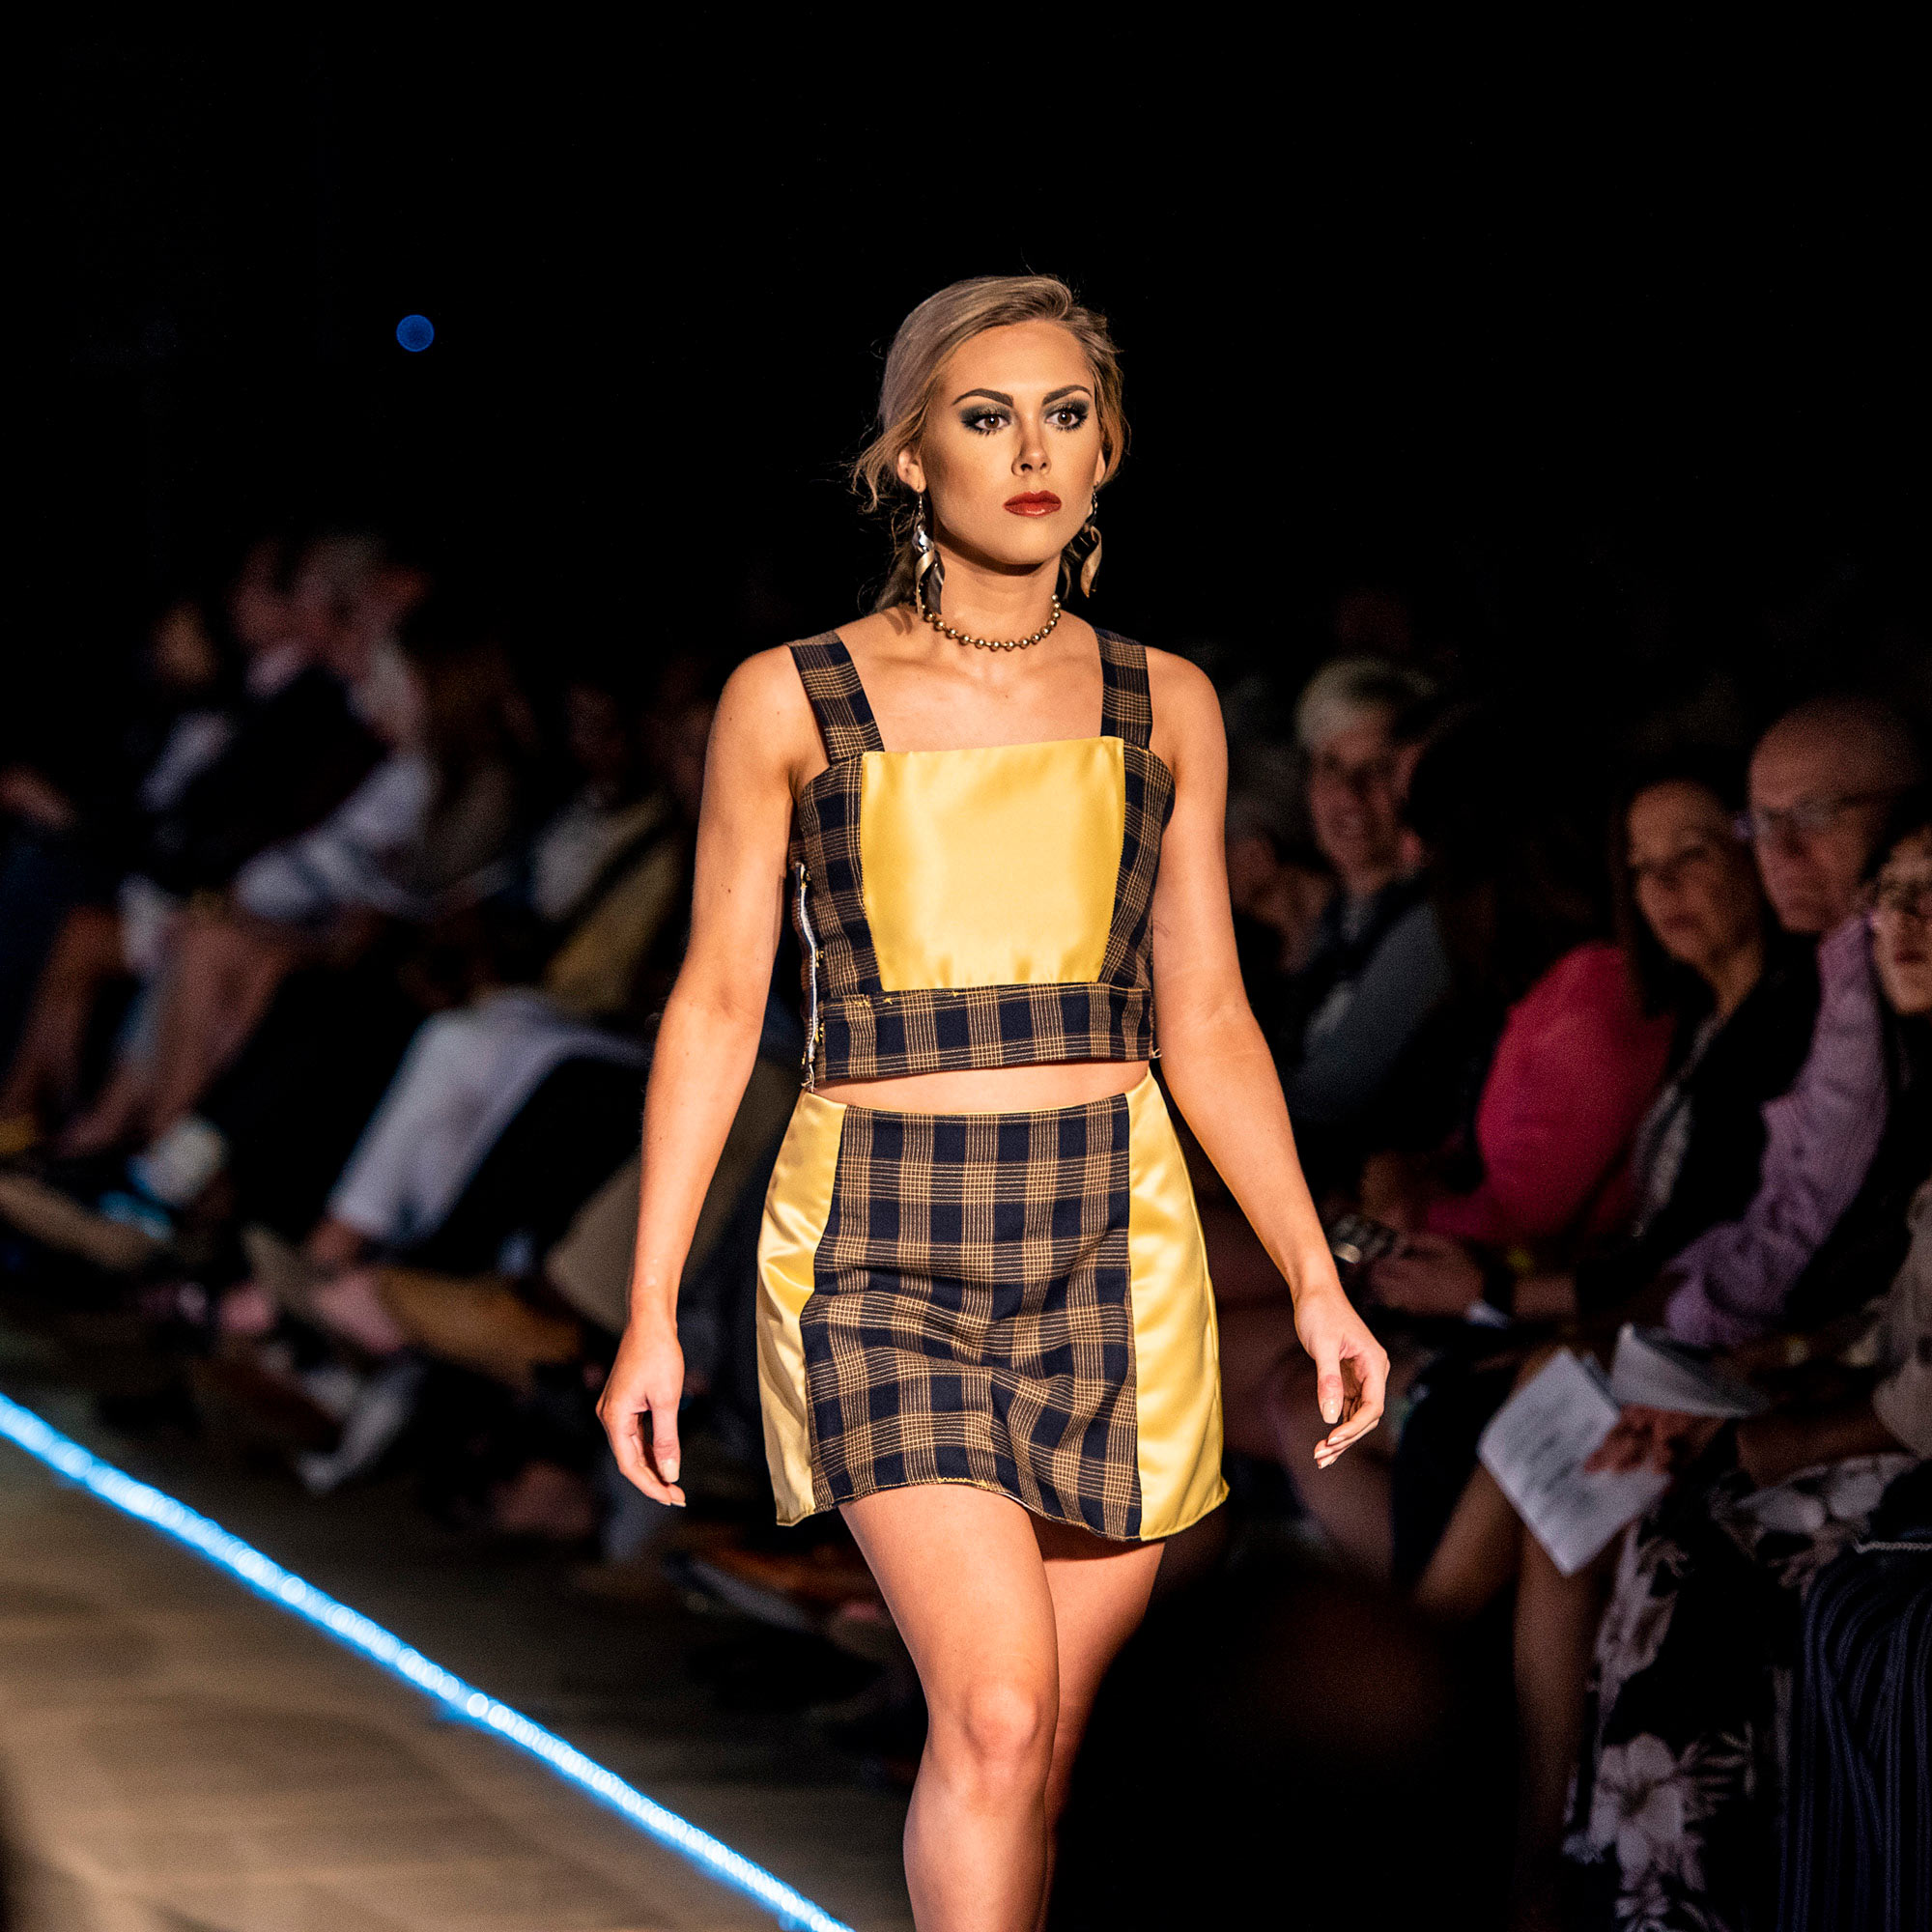 Model walking the runway in a plaid and yellow two piece skirt during The Fashion Event: Mod.